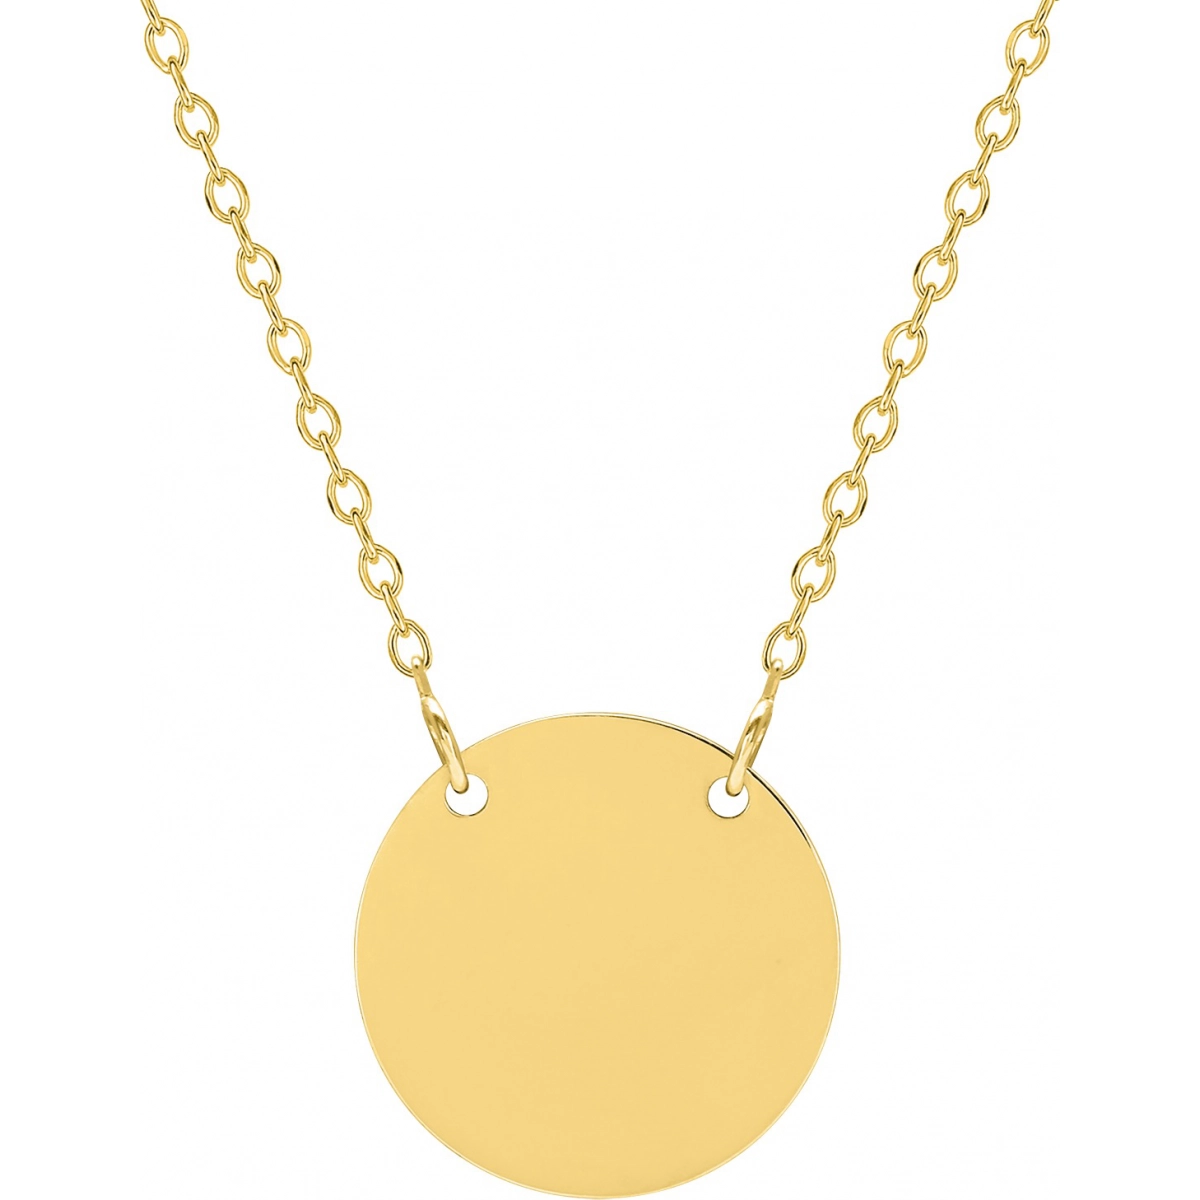 Necklace w. 15mm tokeh gold plated Brass  Lua Blanca  132306.0